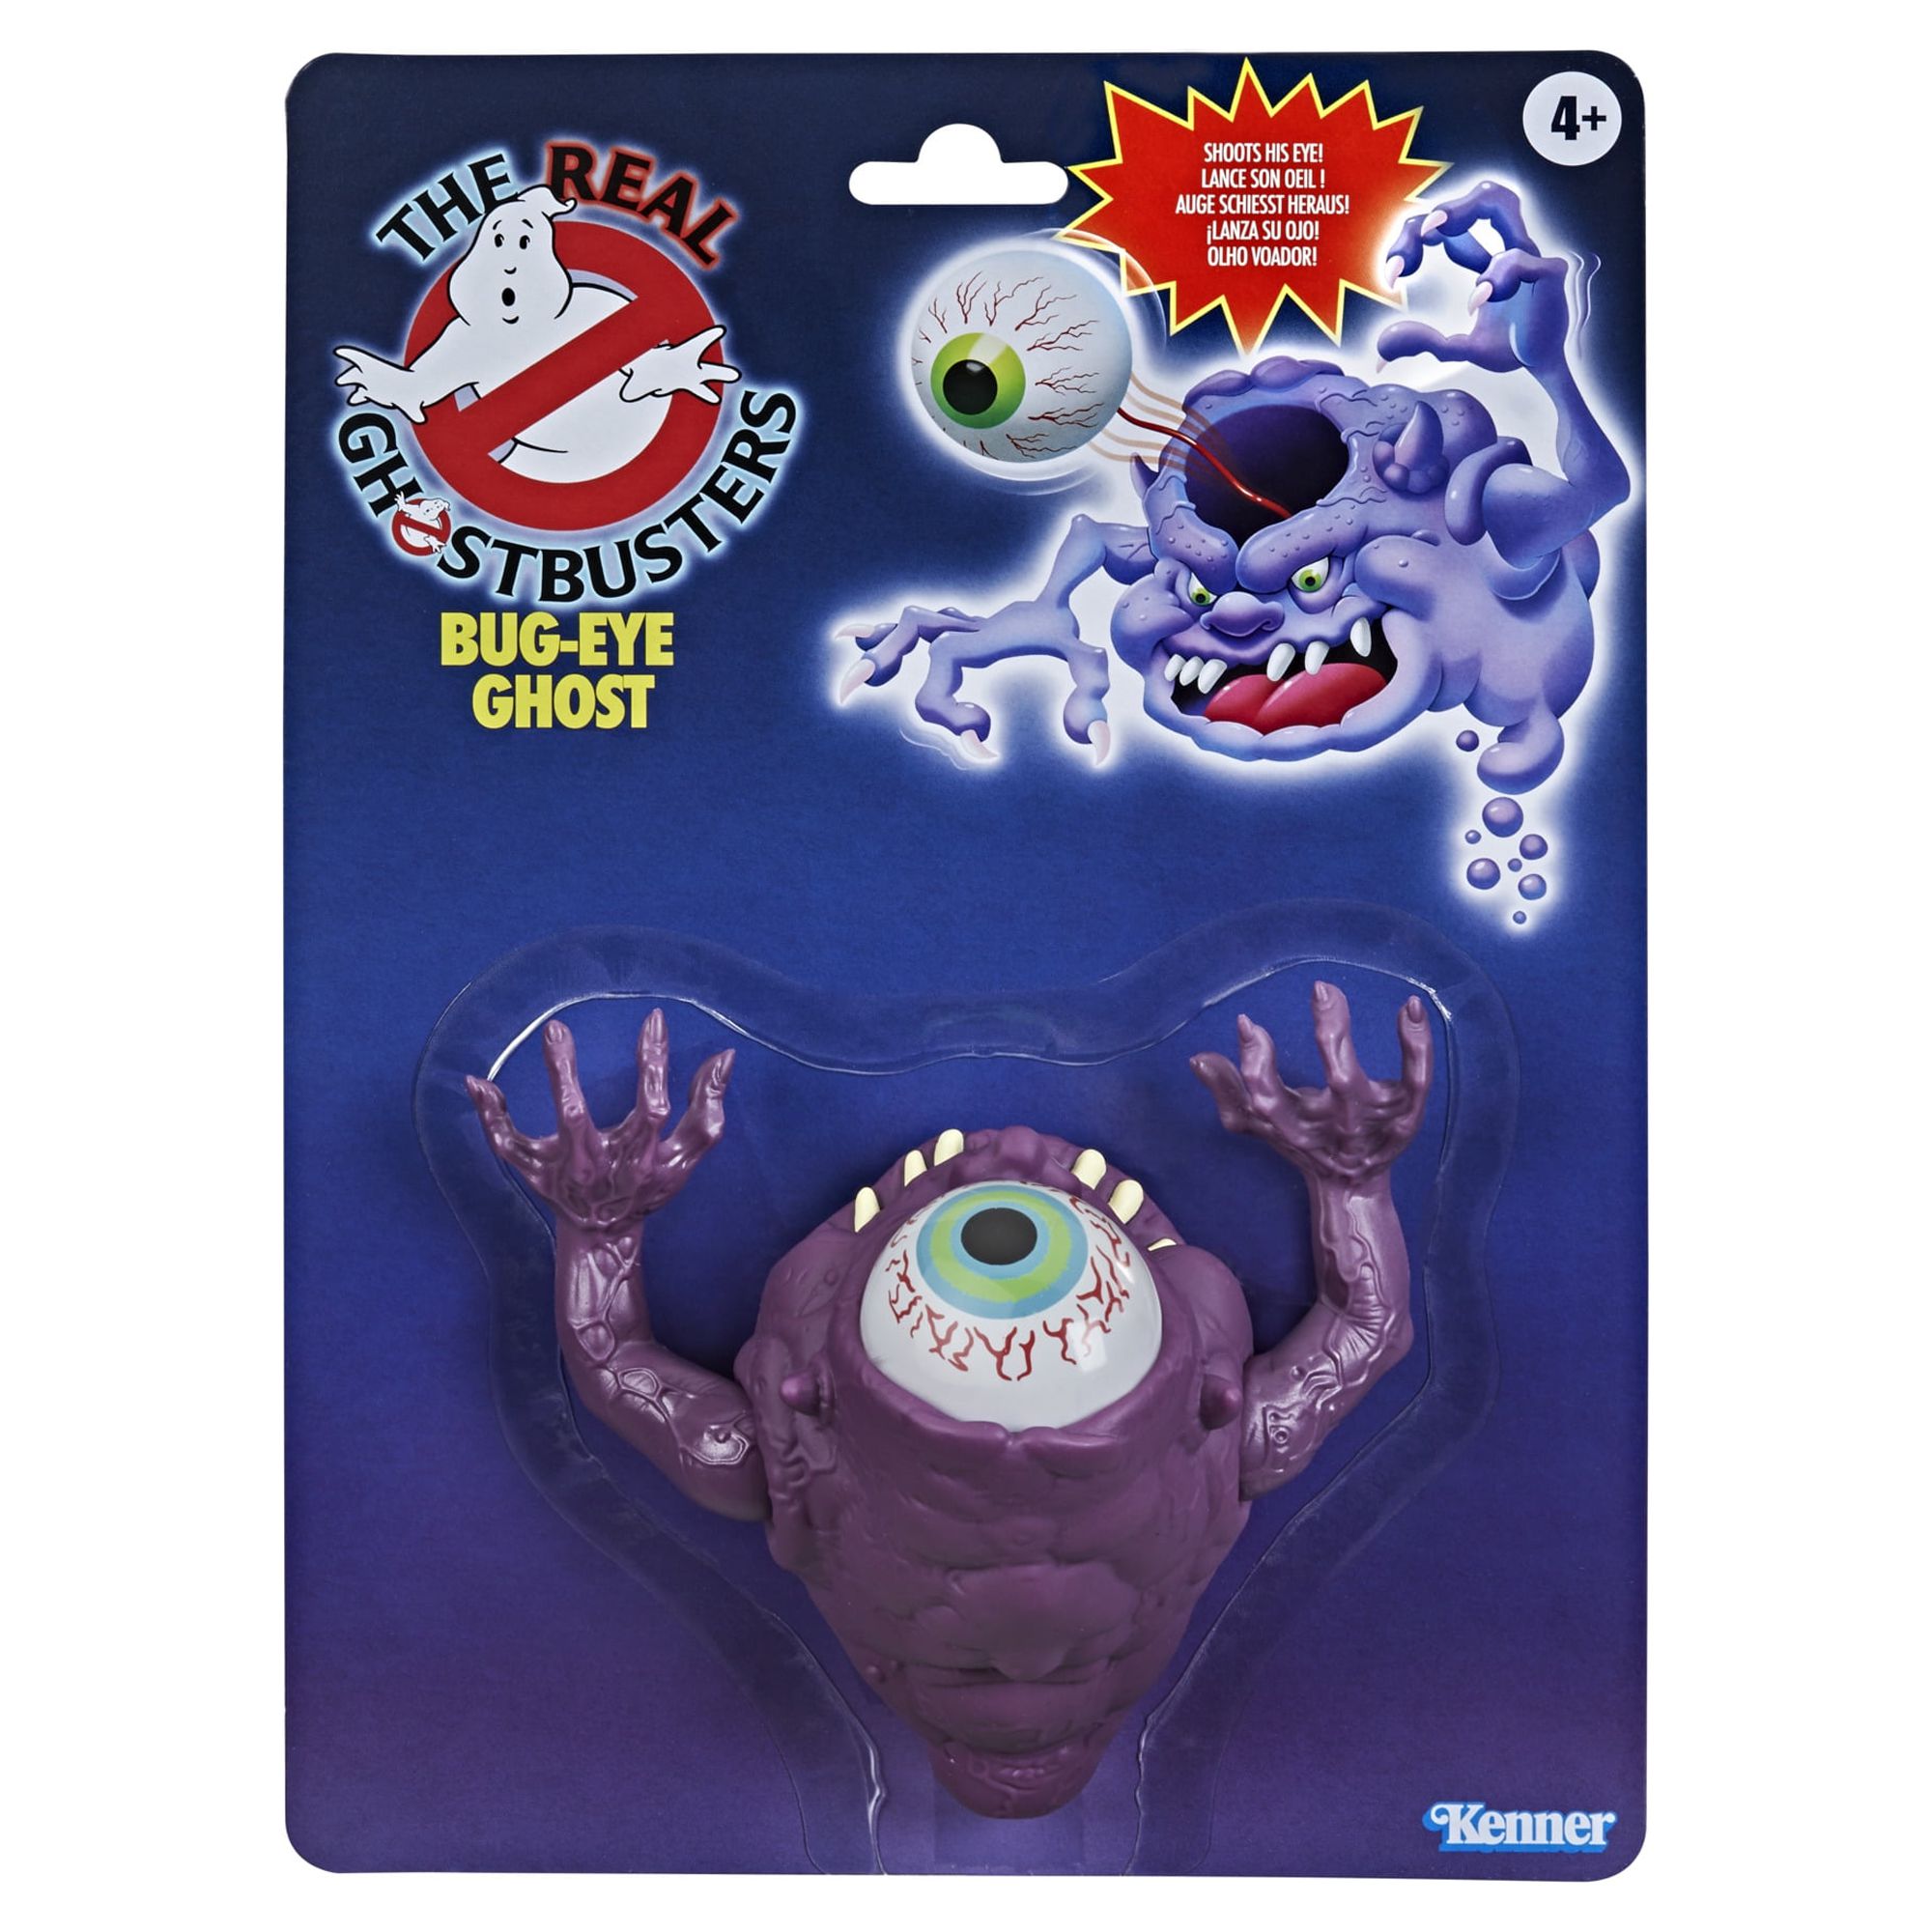 Ghostbusters Kenner Classics The Real Ghostbusters Bug-Eye Ghost Retro Kids Toy Action Figure for Boys and Girls Ages 4 5 6 7 8 and Up - image 4 of 6